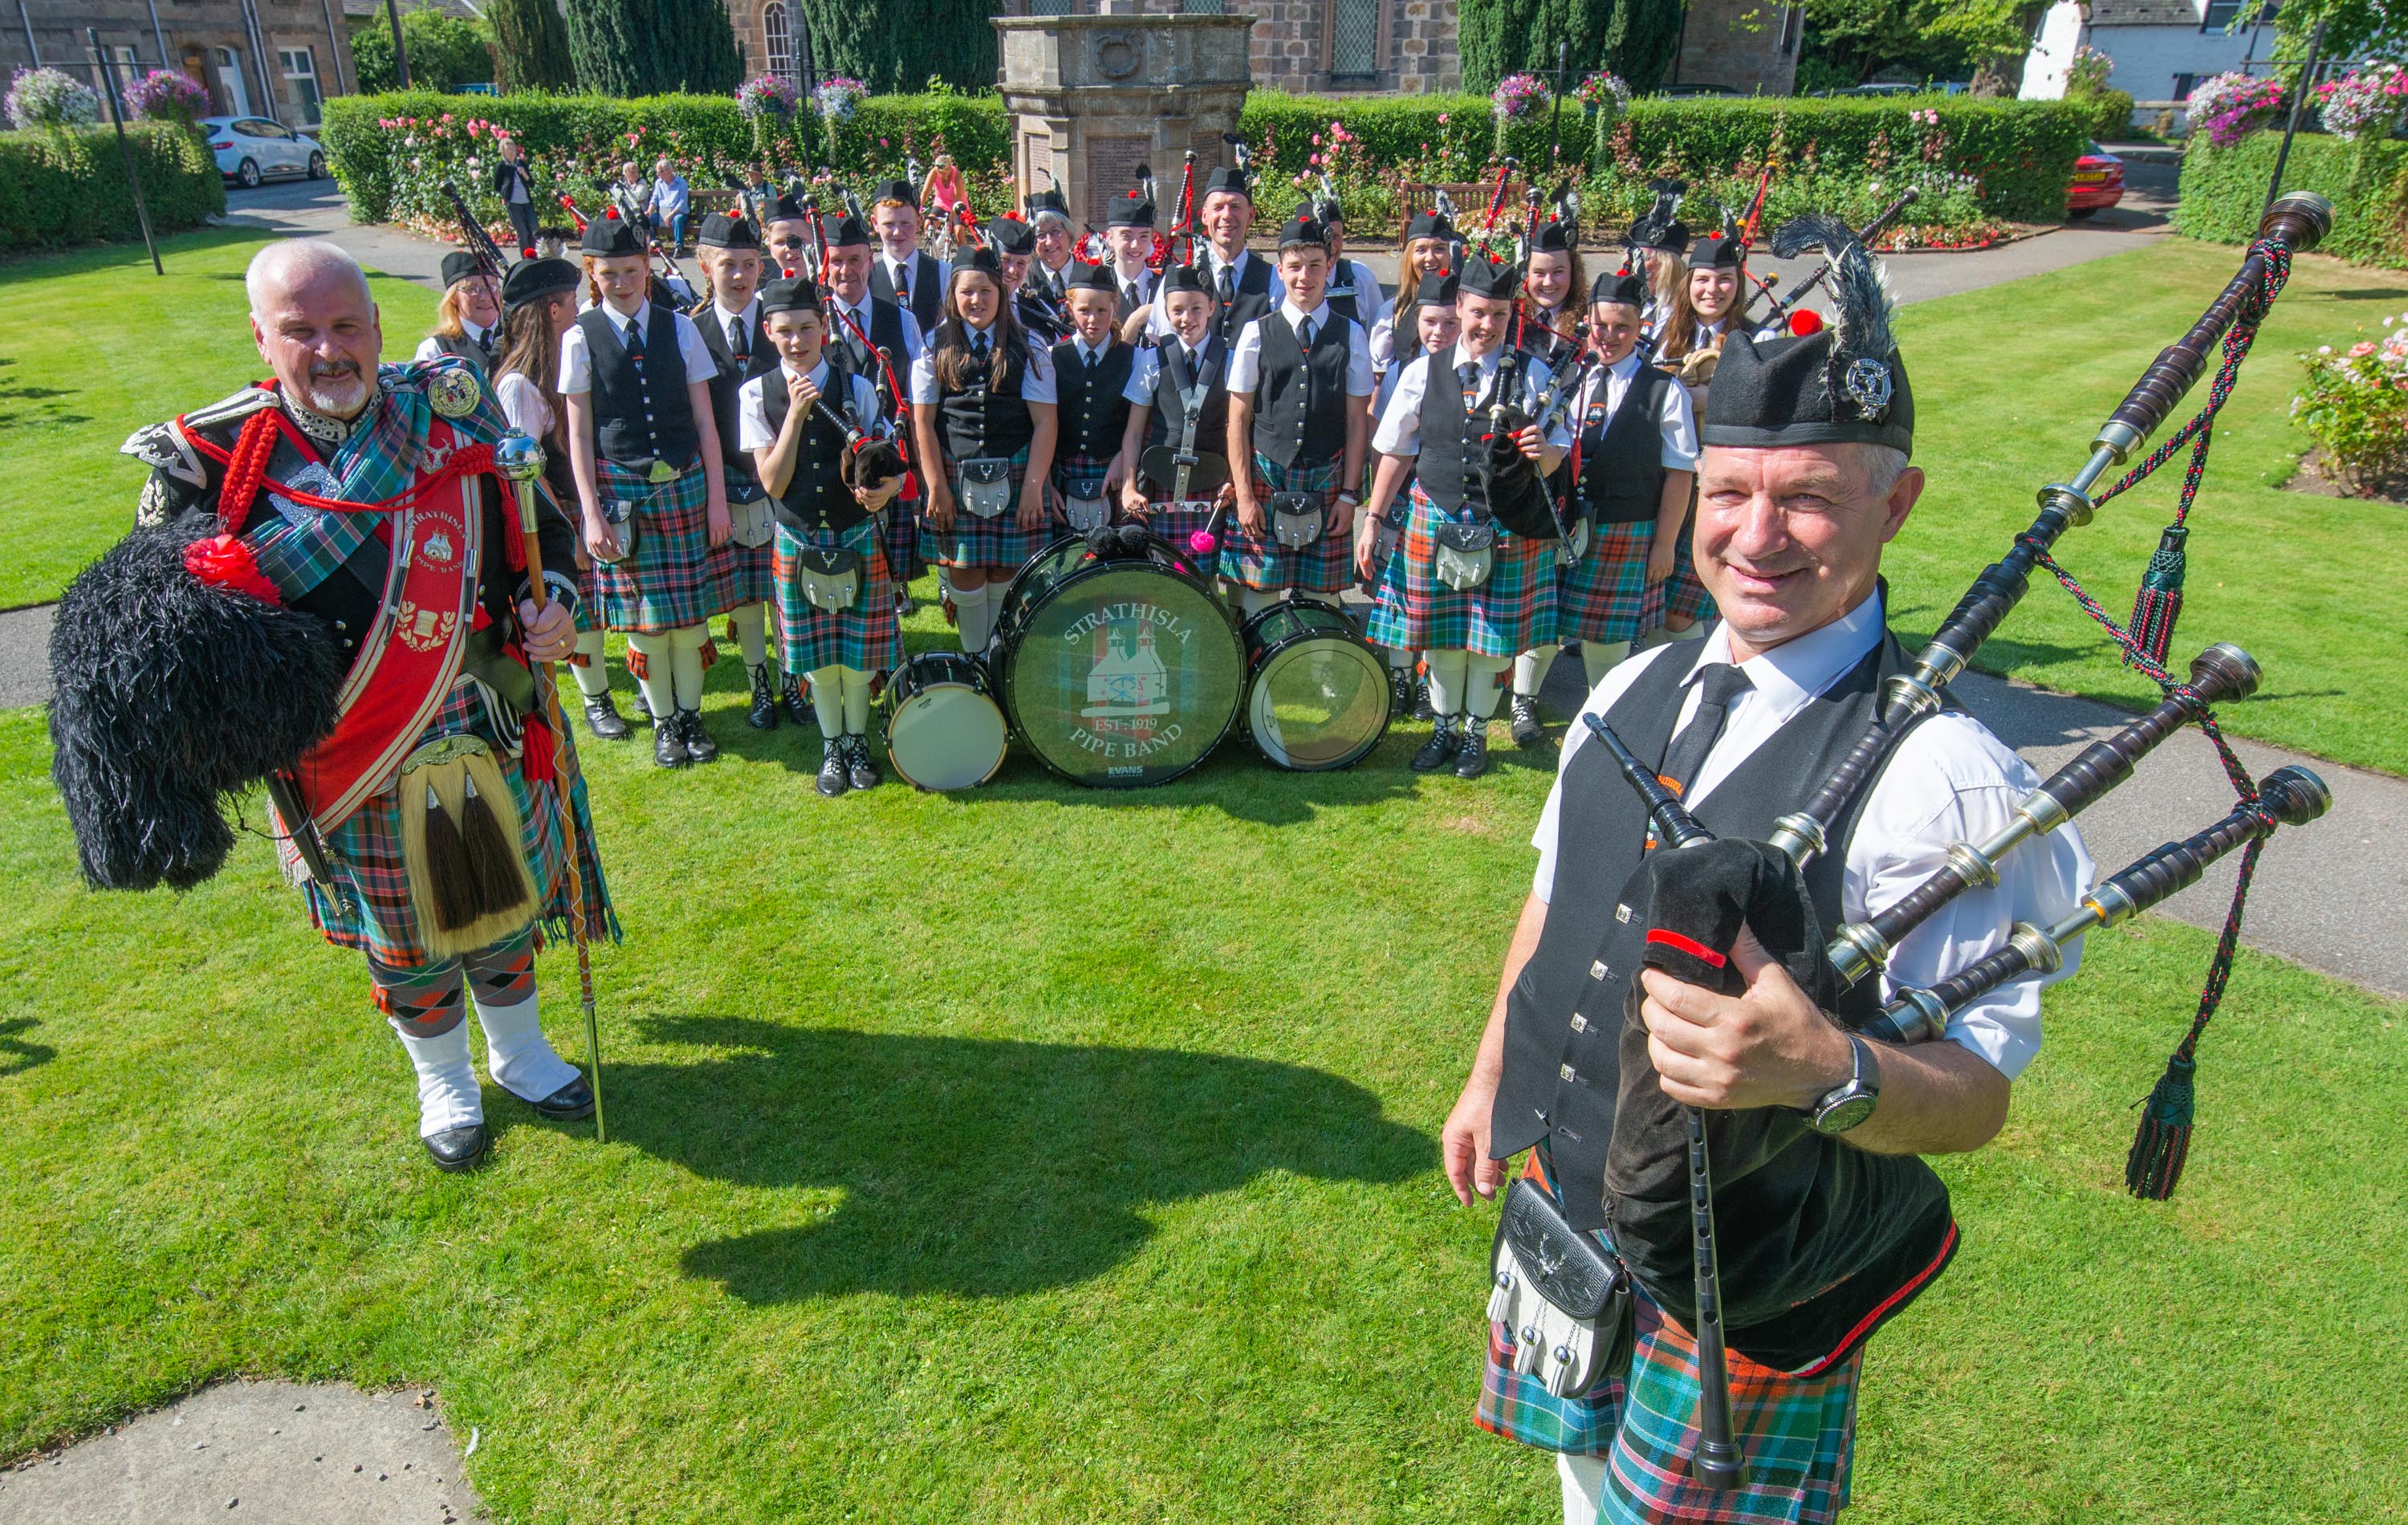 Strathisla Pipe Band is celebrating its centenary this year.